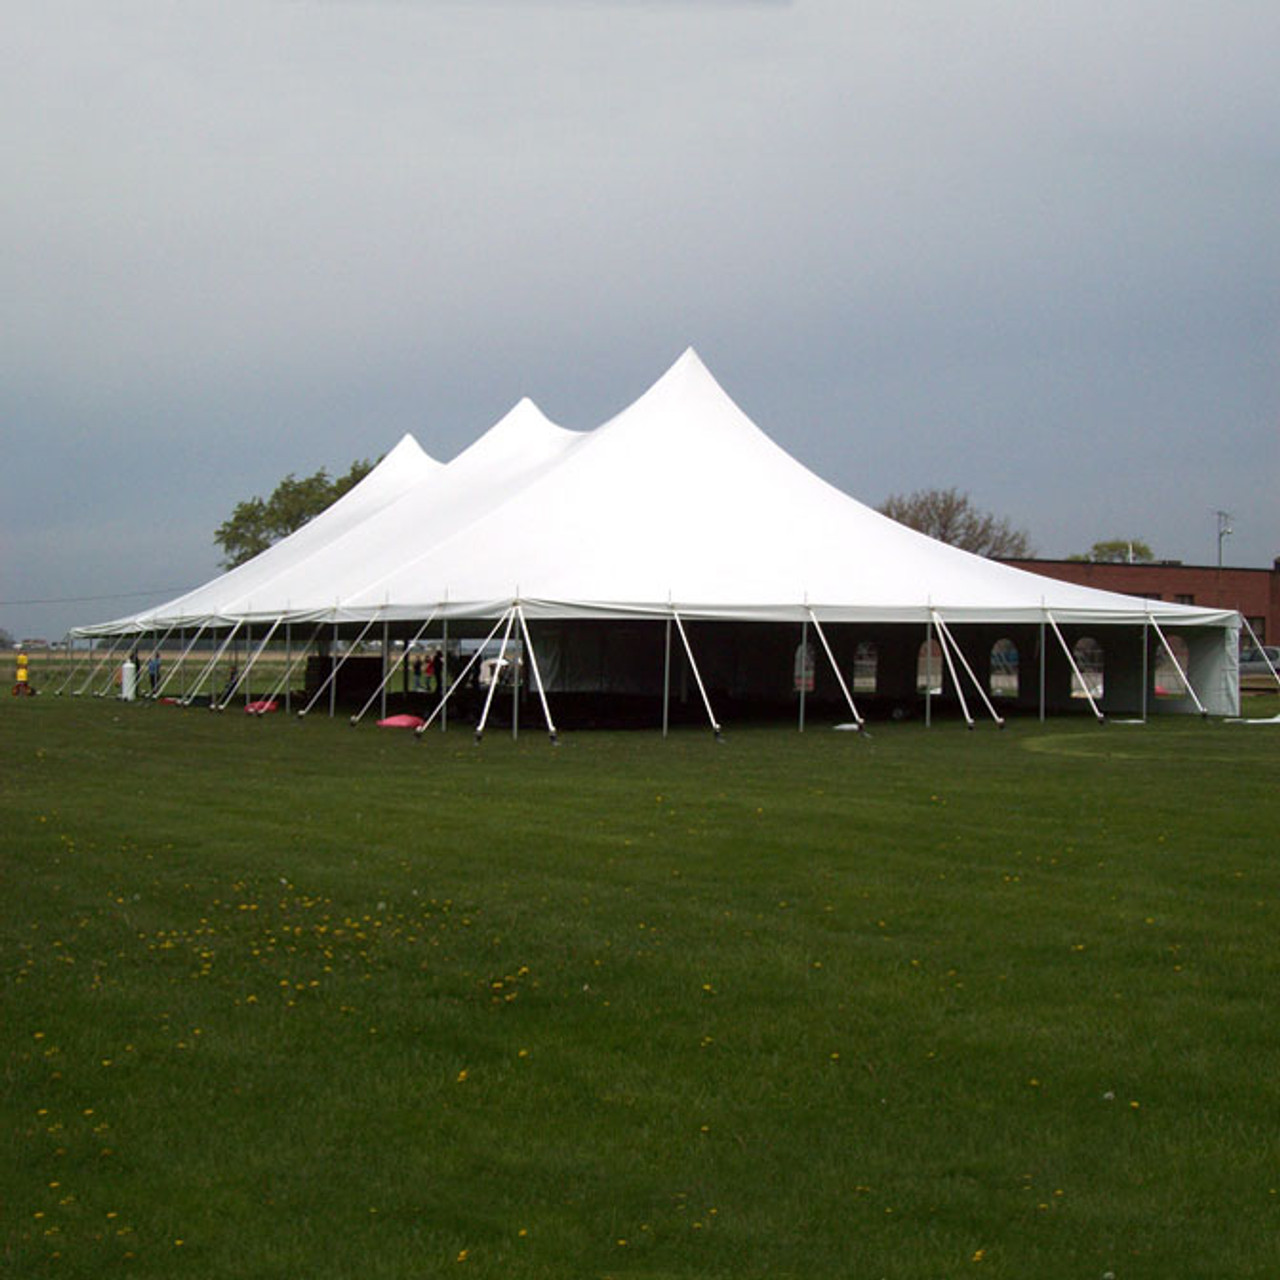 60' x 120' Premiere II Series High Peak Pole Tent, Sectional Tent Top, Complete